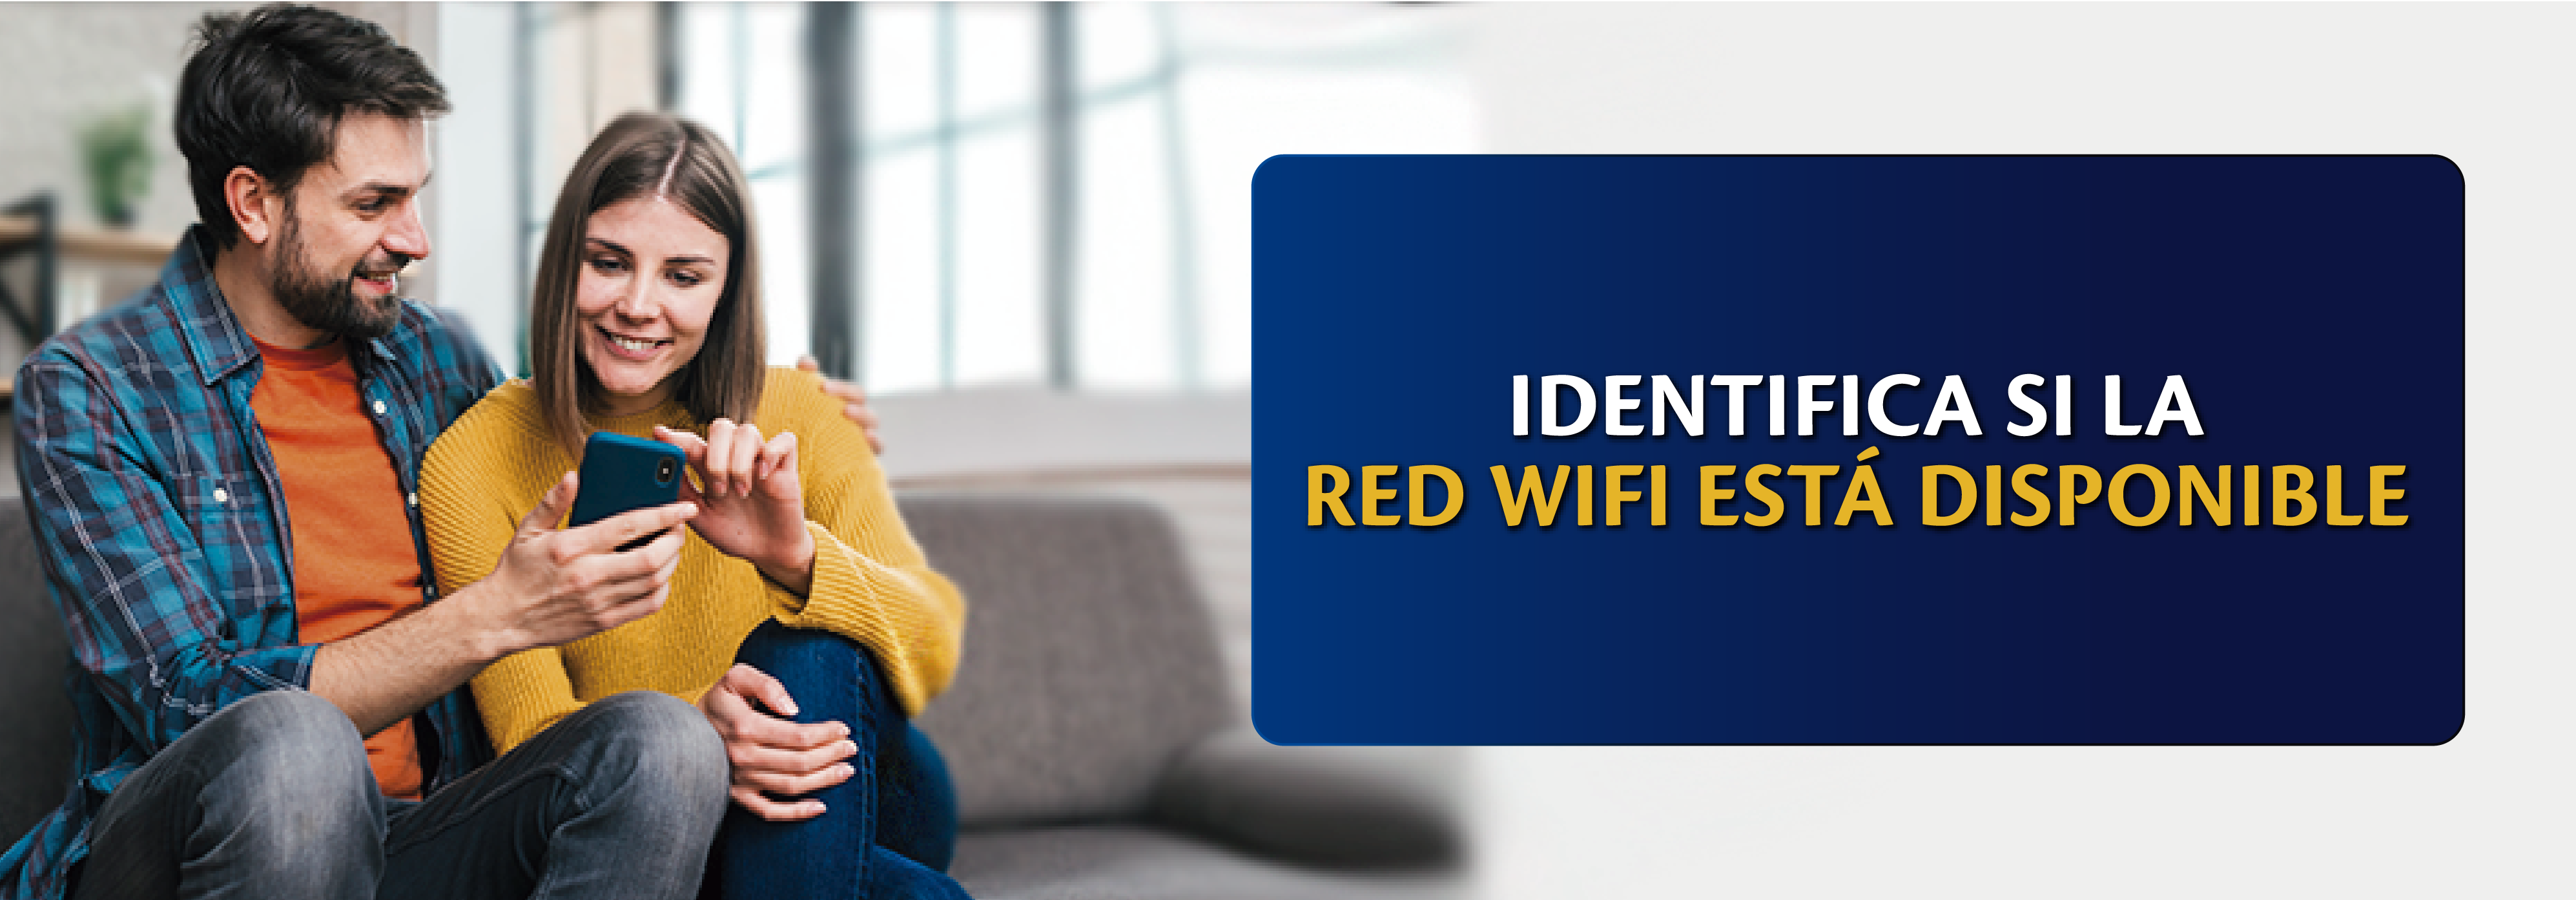 aw-identificar redes wifi disponibles